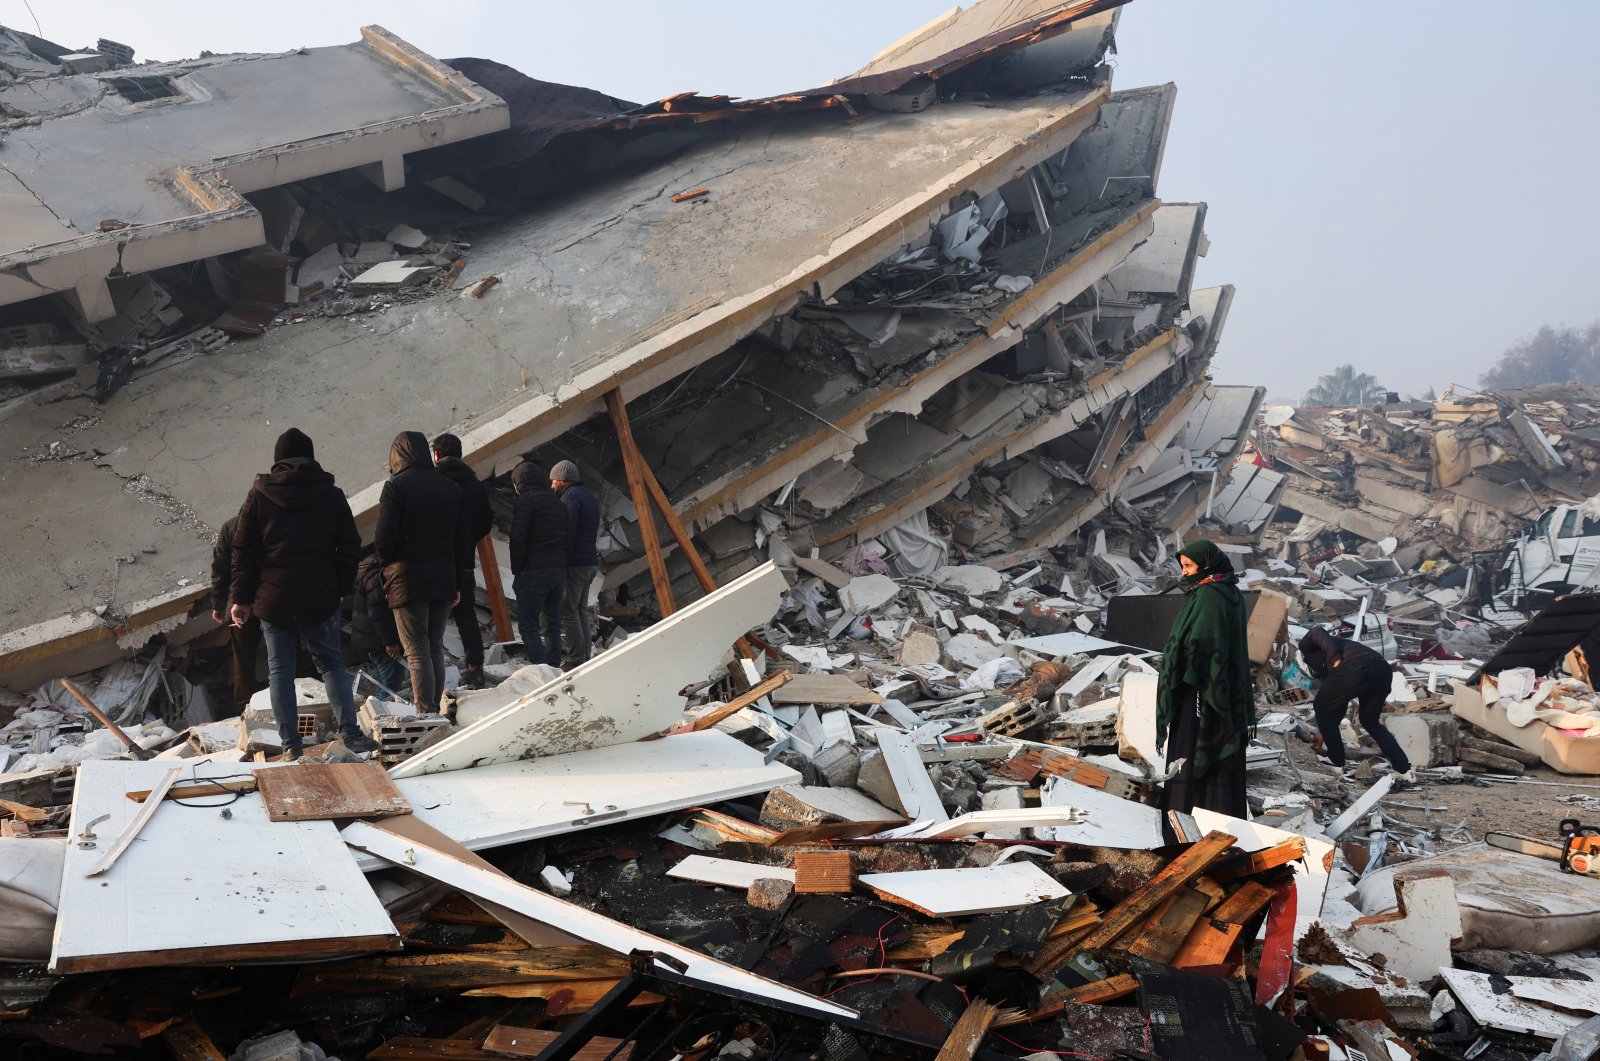 People look at rubble and damage following an earthquake in Hatay, Türkiye, Feb. 7, 2023. (Reuters Photo)